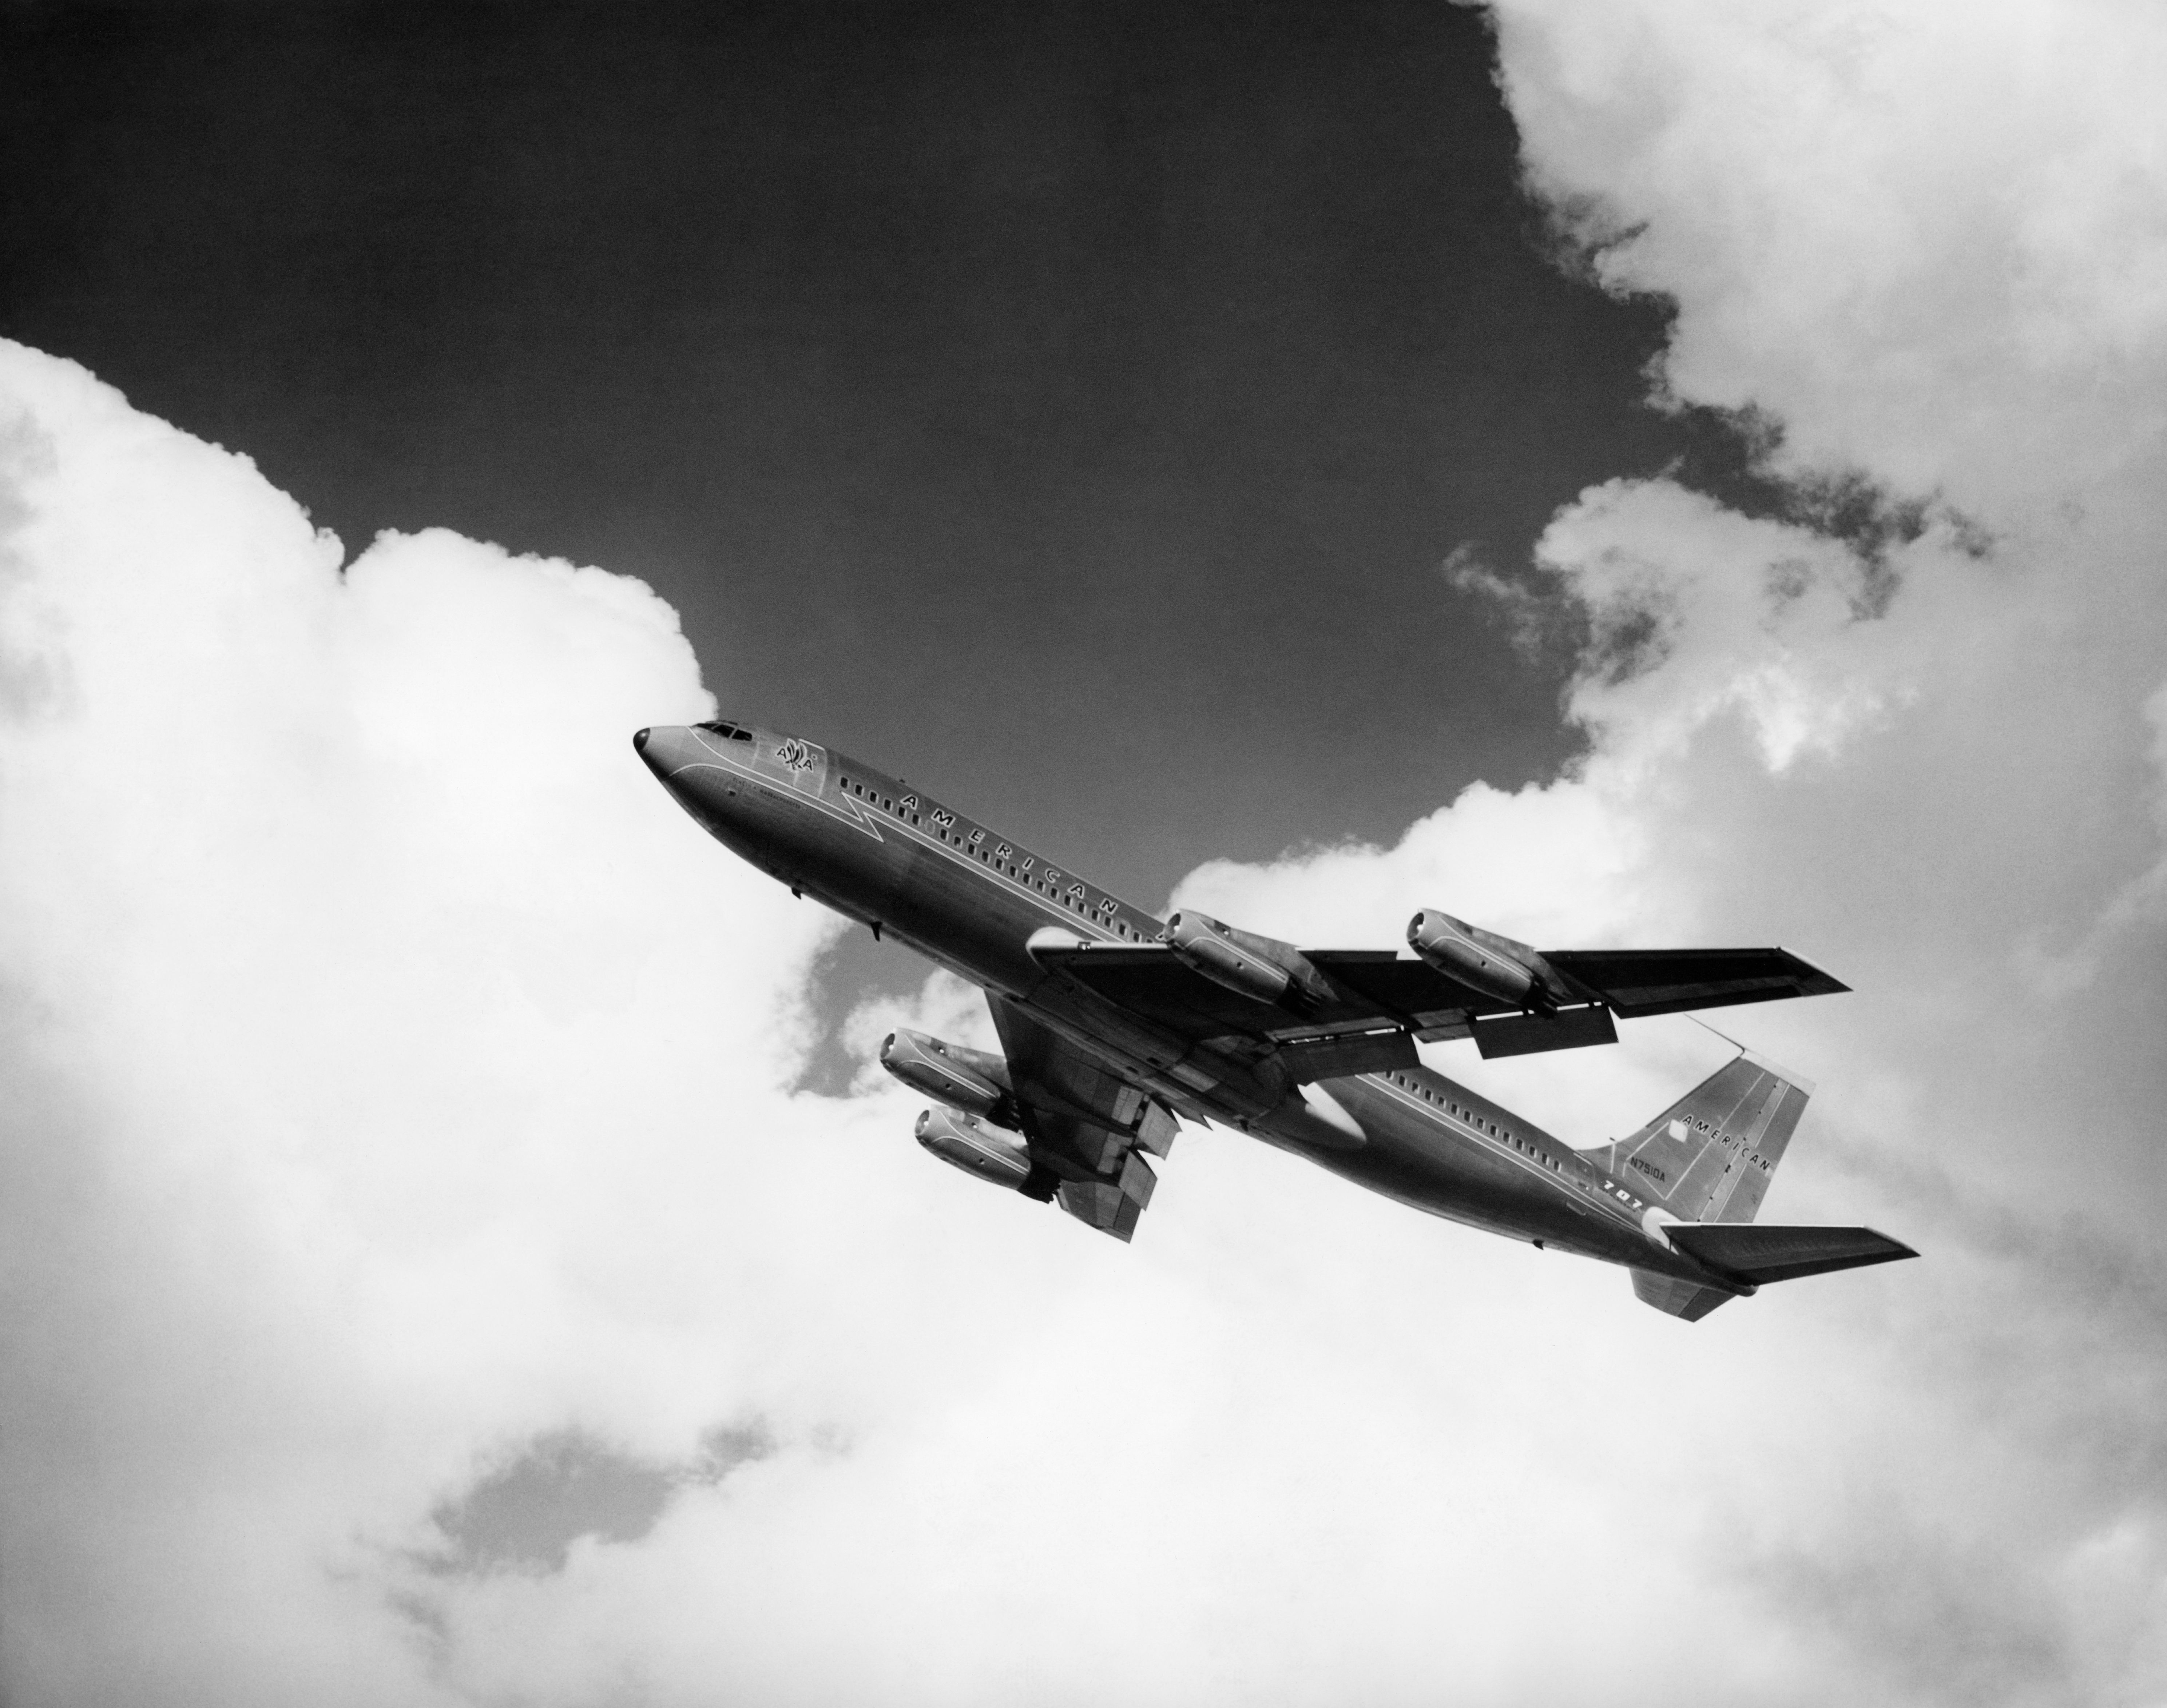 American 707 passing through the clouds